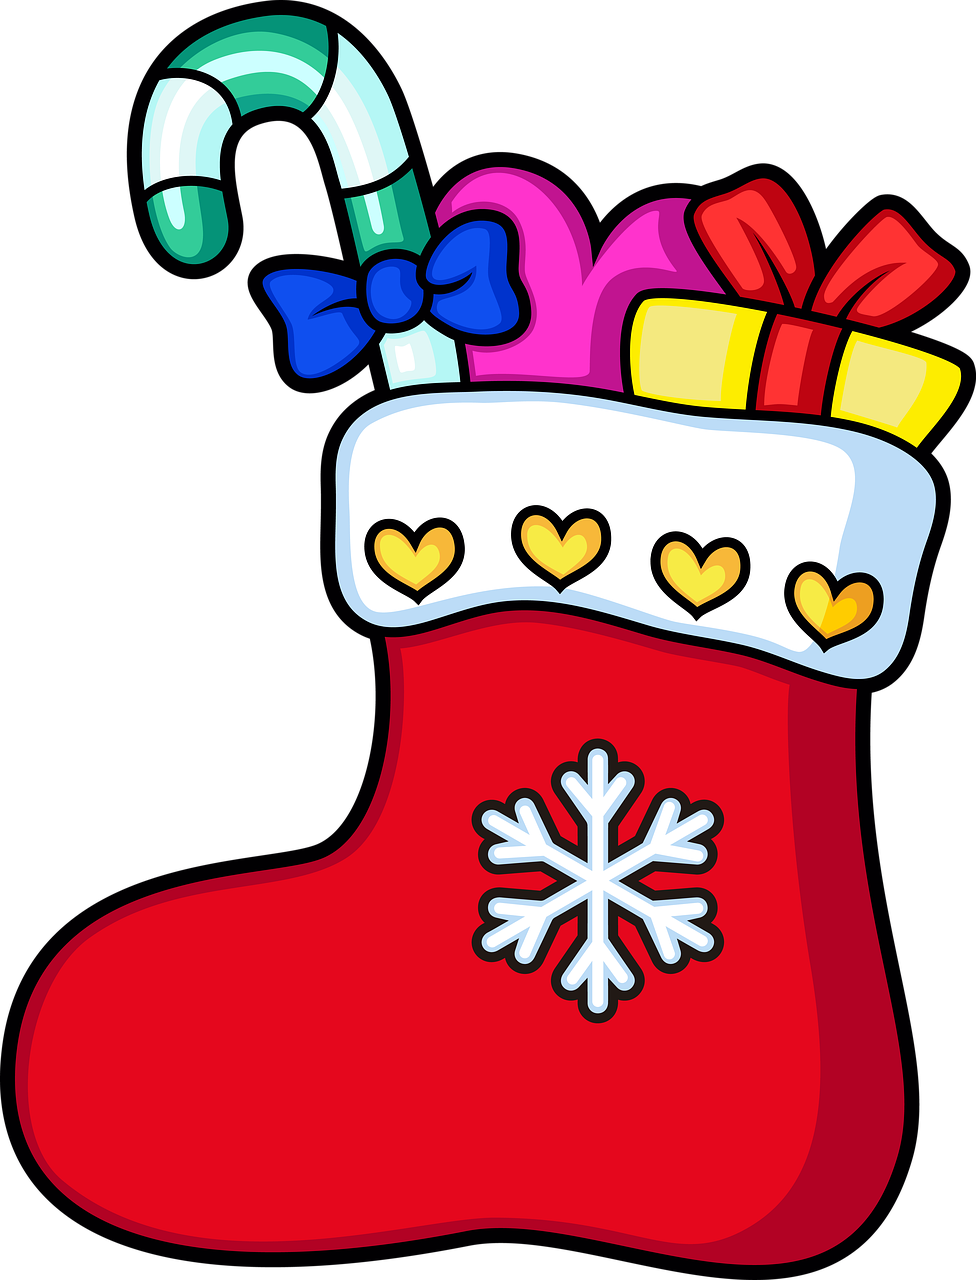 a christmas stocking filled with gifts and a candy cane, a digital rendering, by Romero Britto, shutterstock, clip-art, looking from slightly below, red boots, on black background